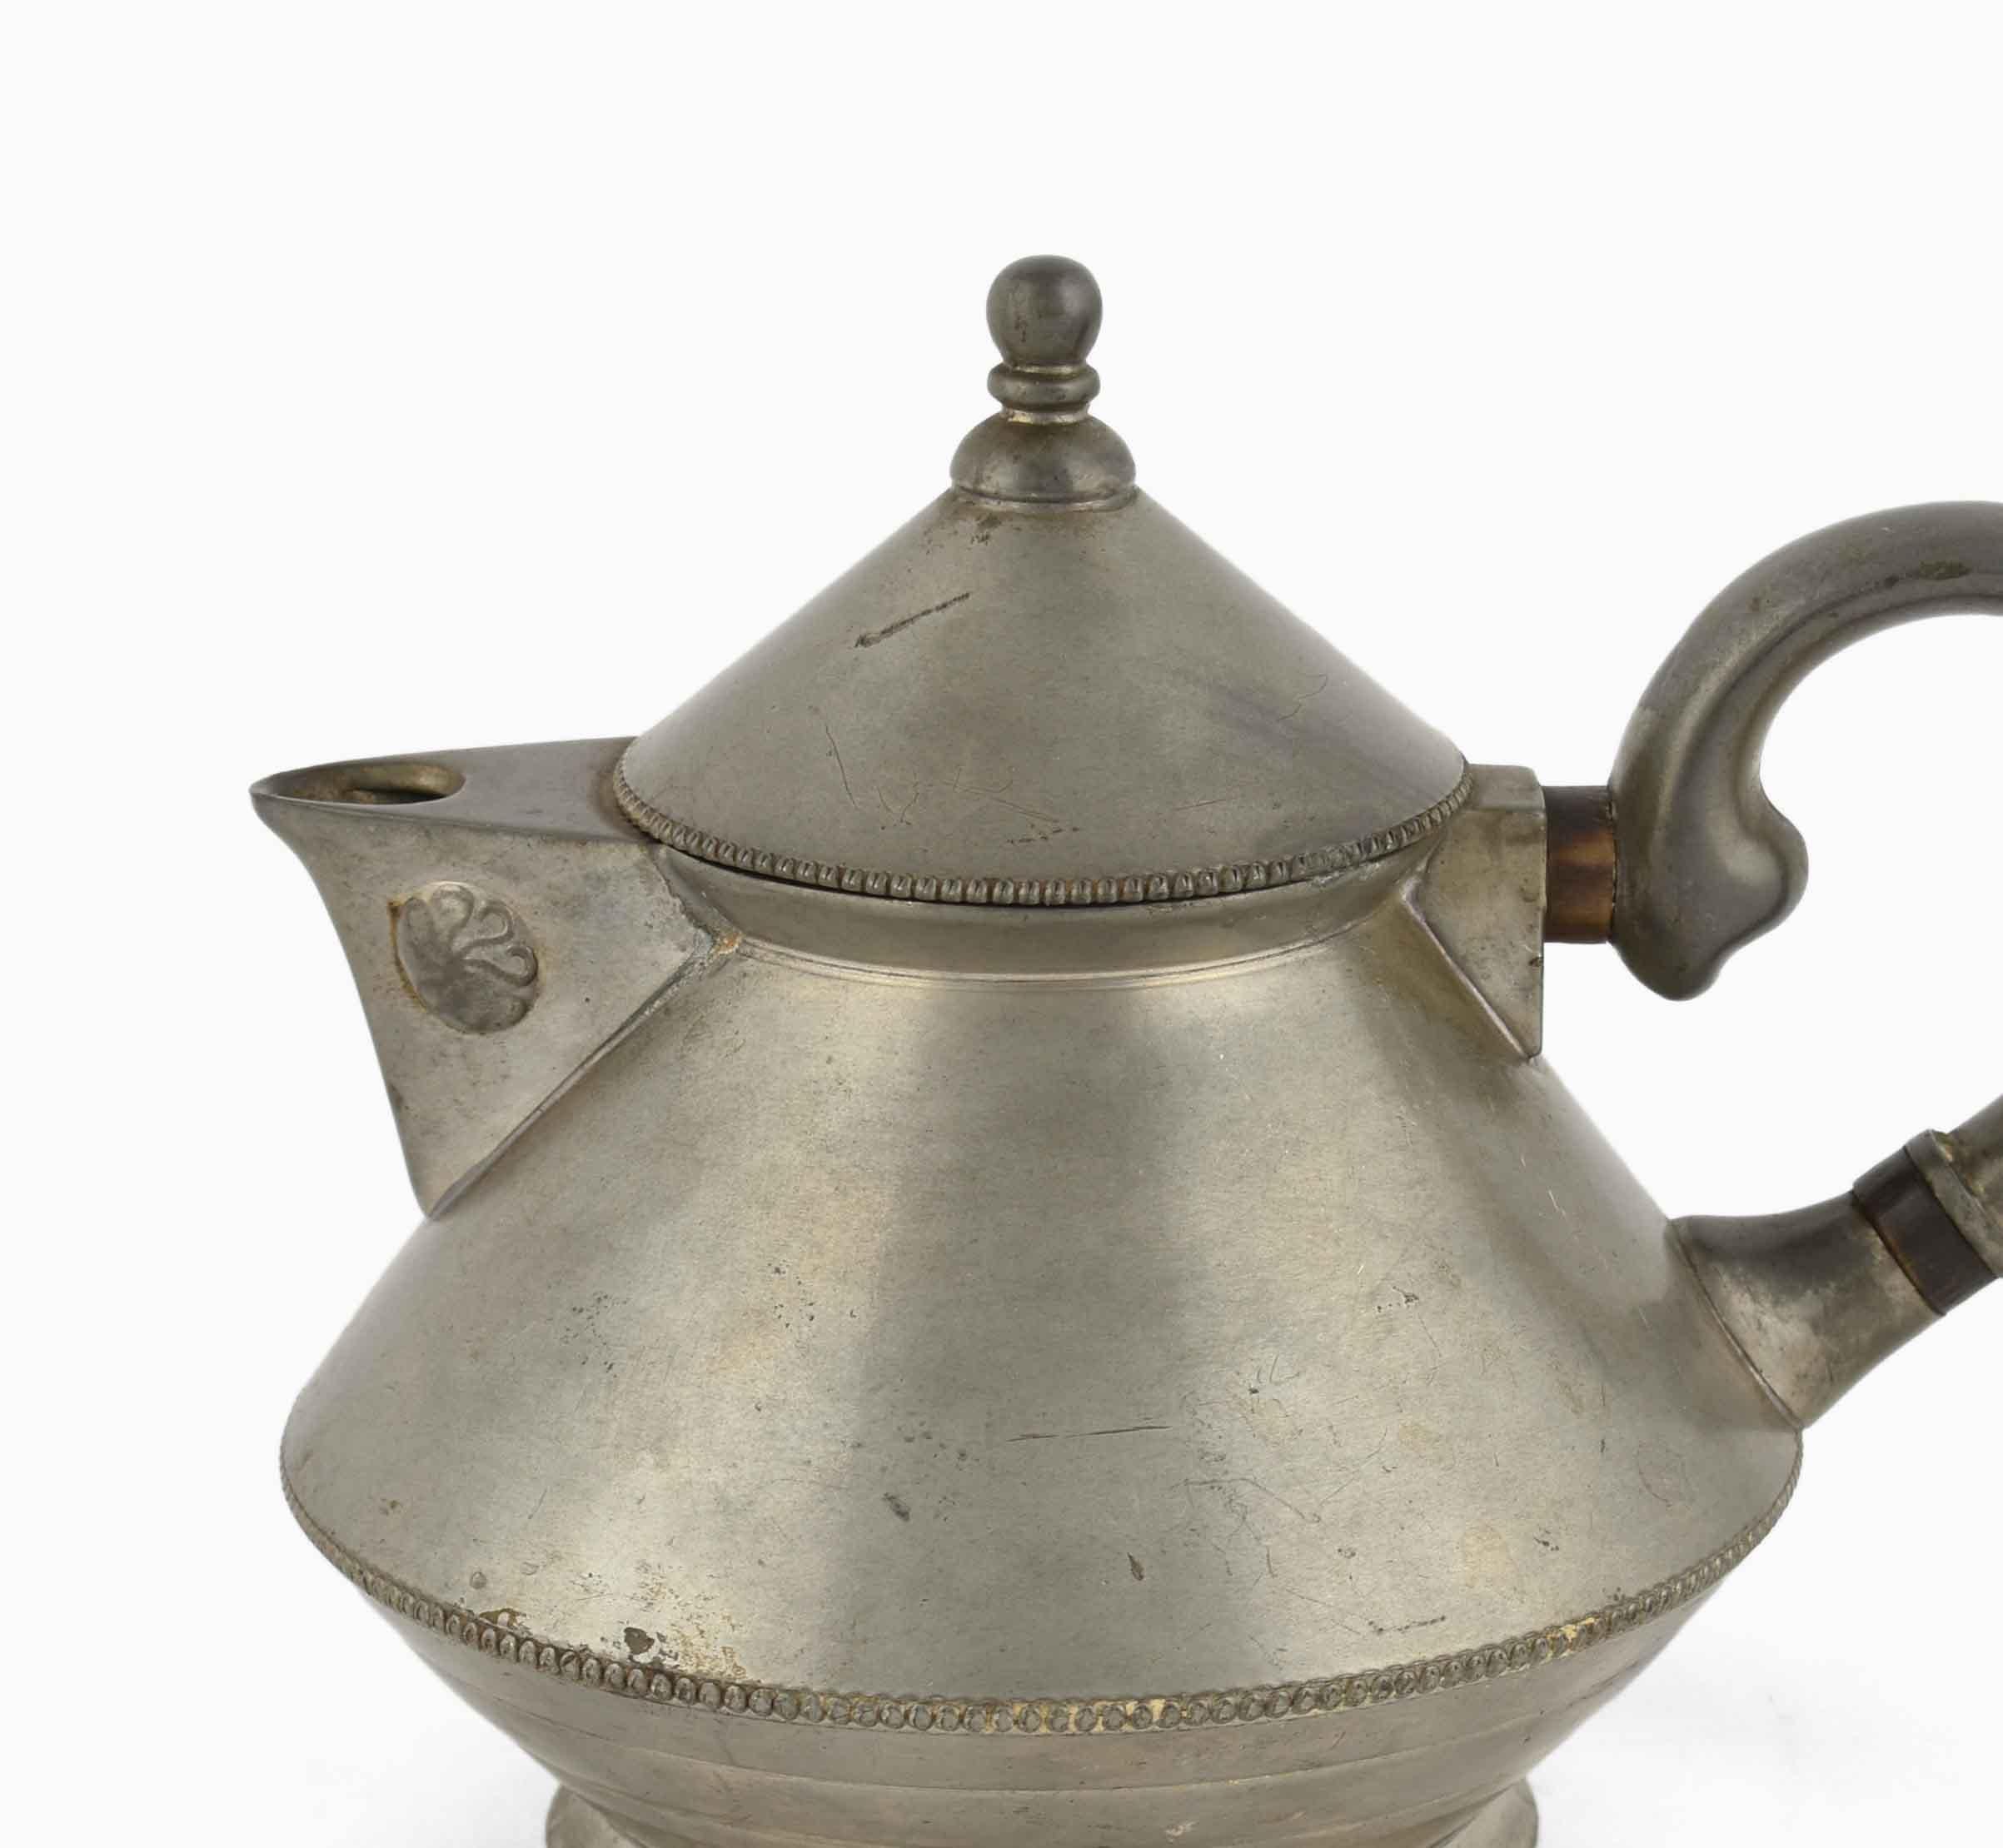 Art Nouveau pot is an original decorative object realized in 1905.

Original pewter.

Produced by Gerhardi & Co., Lüdenscheid. Designed by Paul Haustein, model no. 1829.

Very good conditions.

Beautiful and elegant pewter pot with a